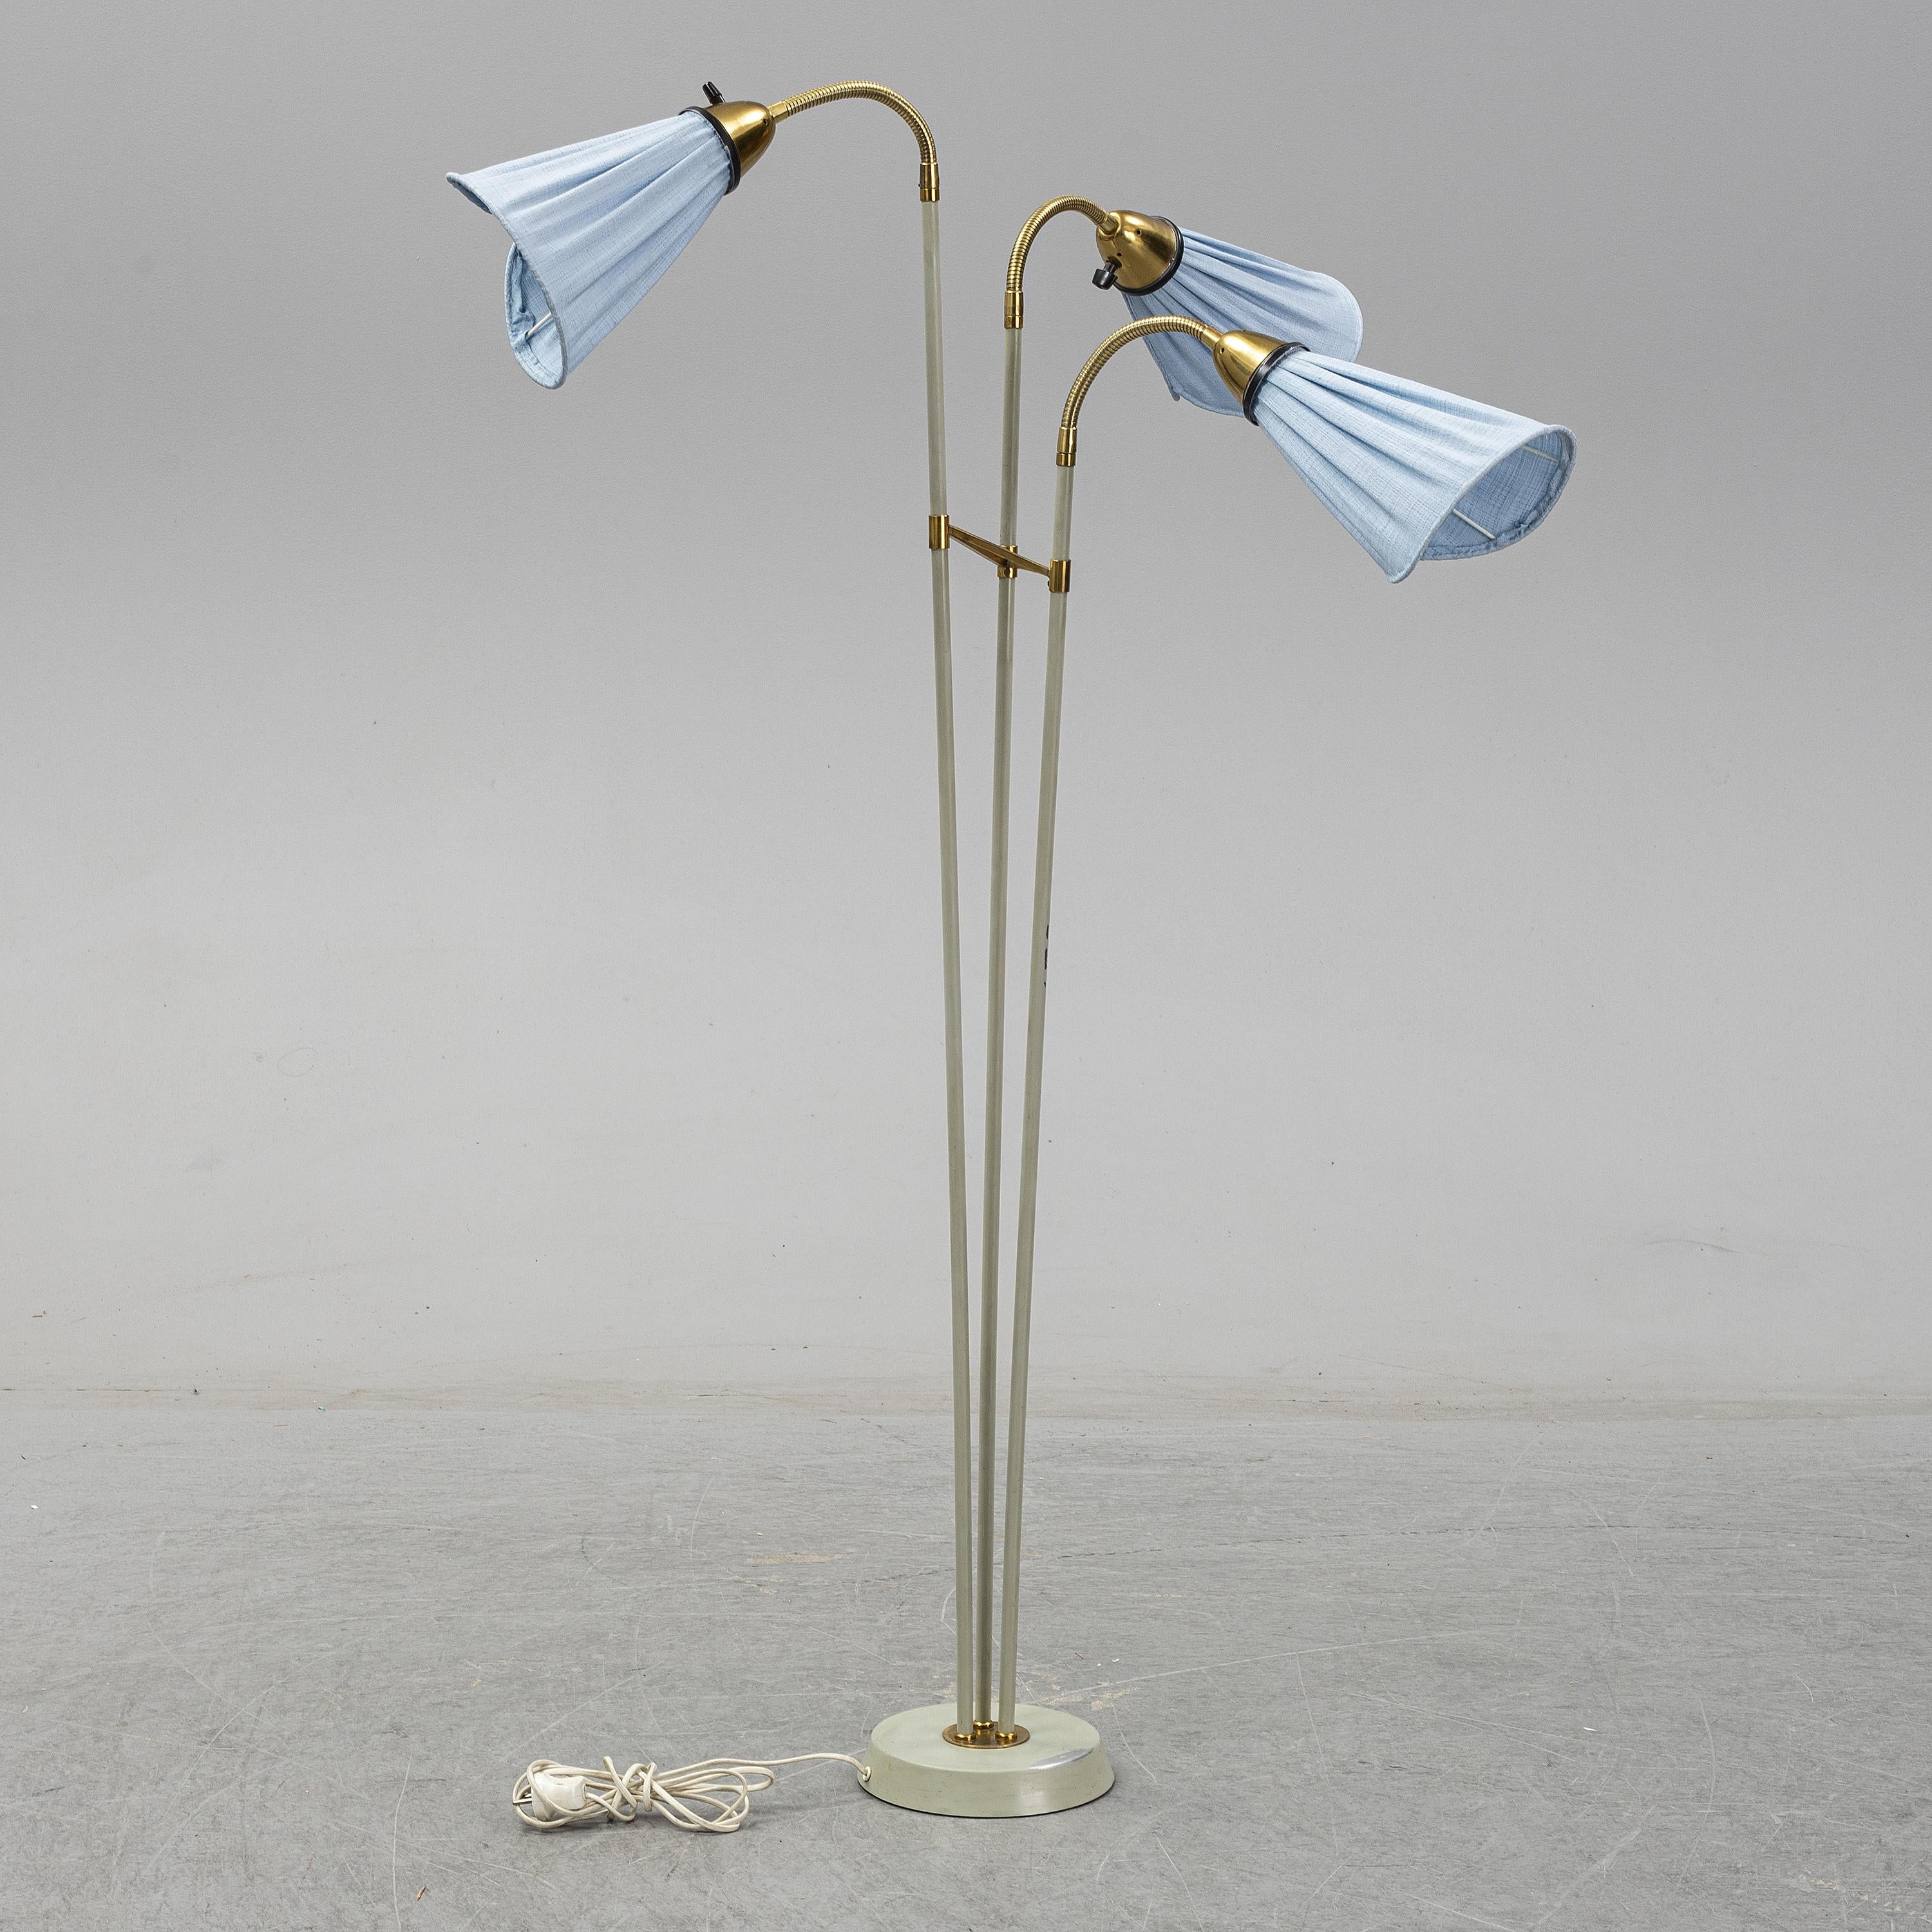 Midcentury floor lamp from 1950s. Hand painted. Electrical function Euro but can be converted at no charge if requested. Lovely and unusual - in great vintage condition too!